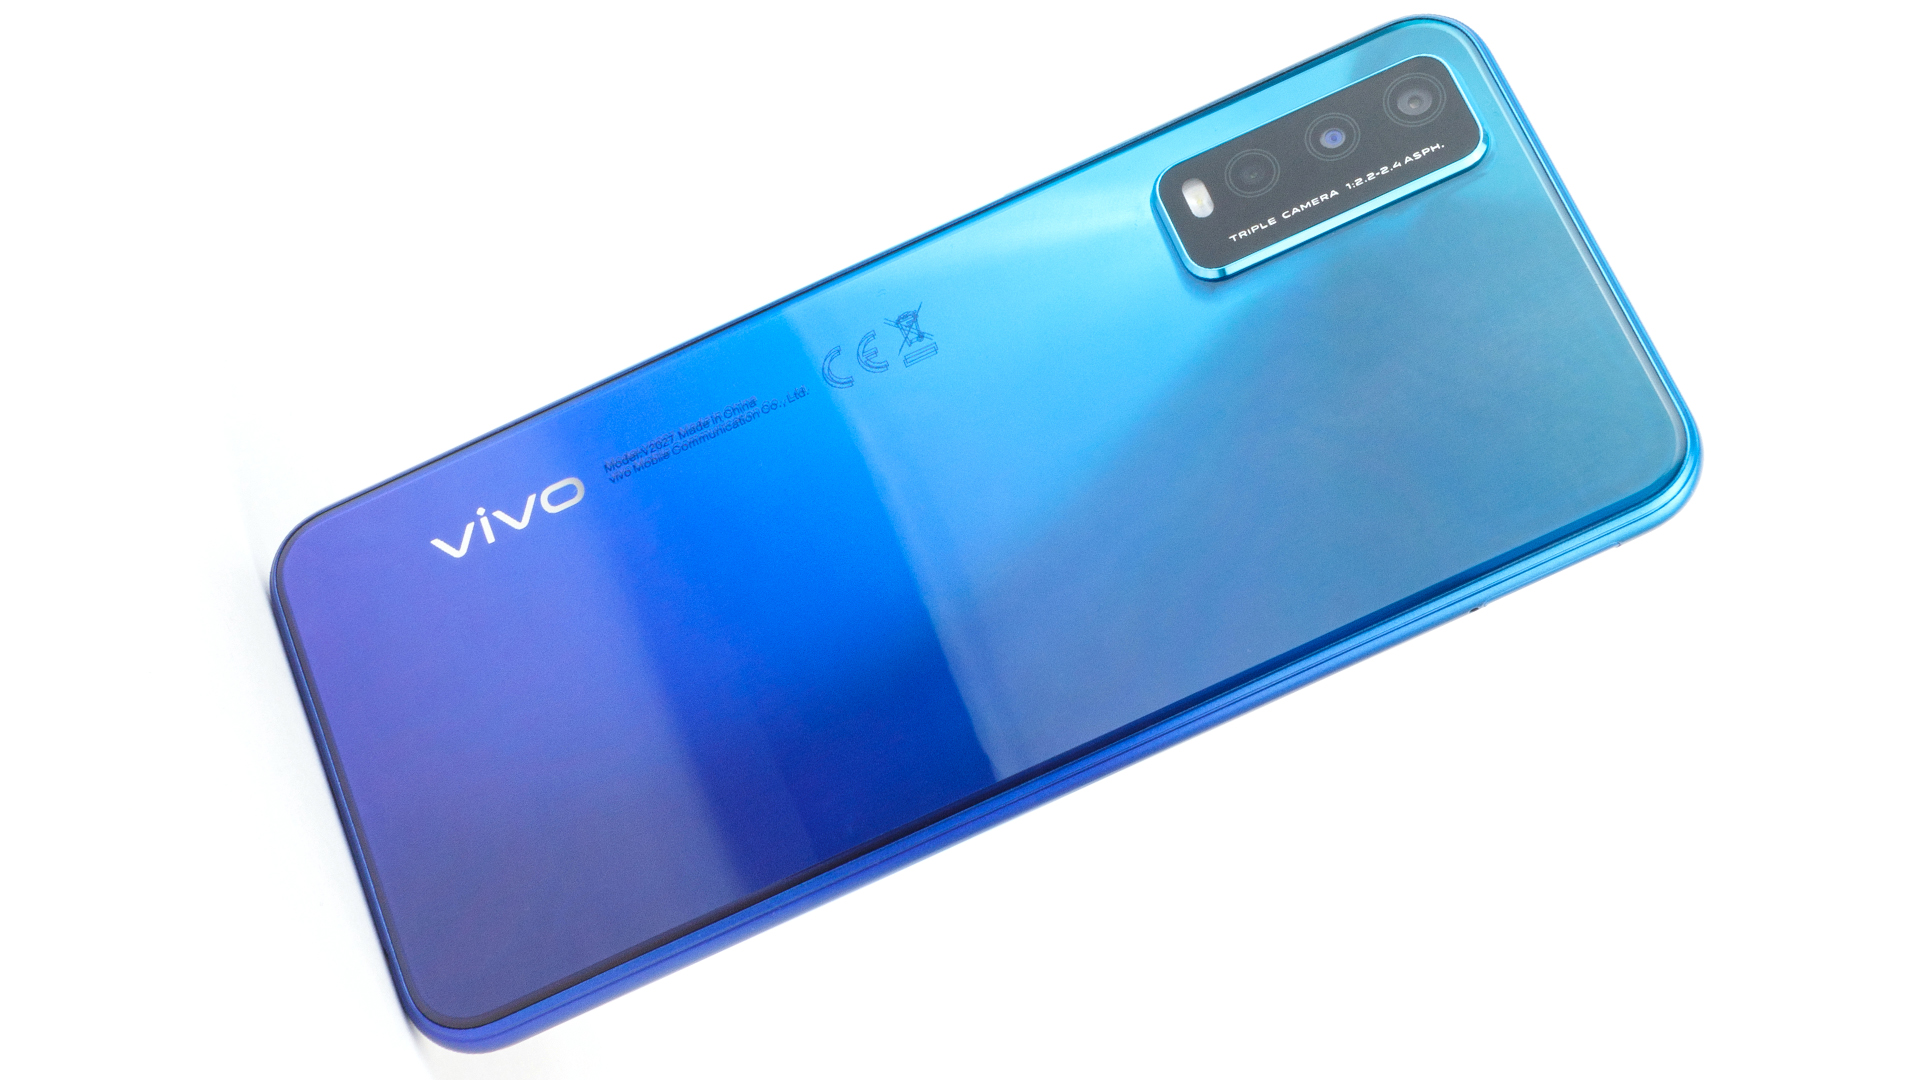 Android 11 Update available for Vivo S1. Vivo V15 Pro (Greyscale Test)